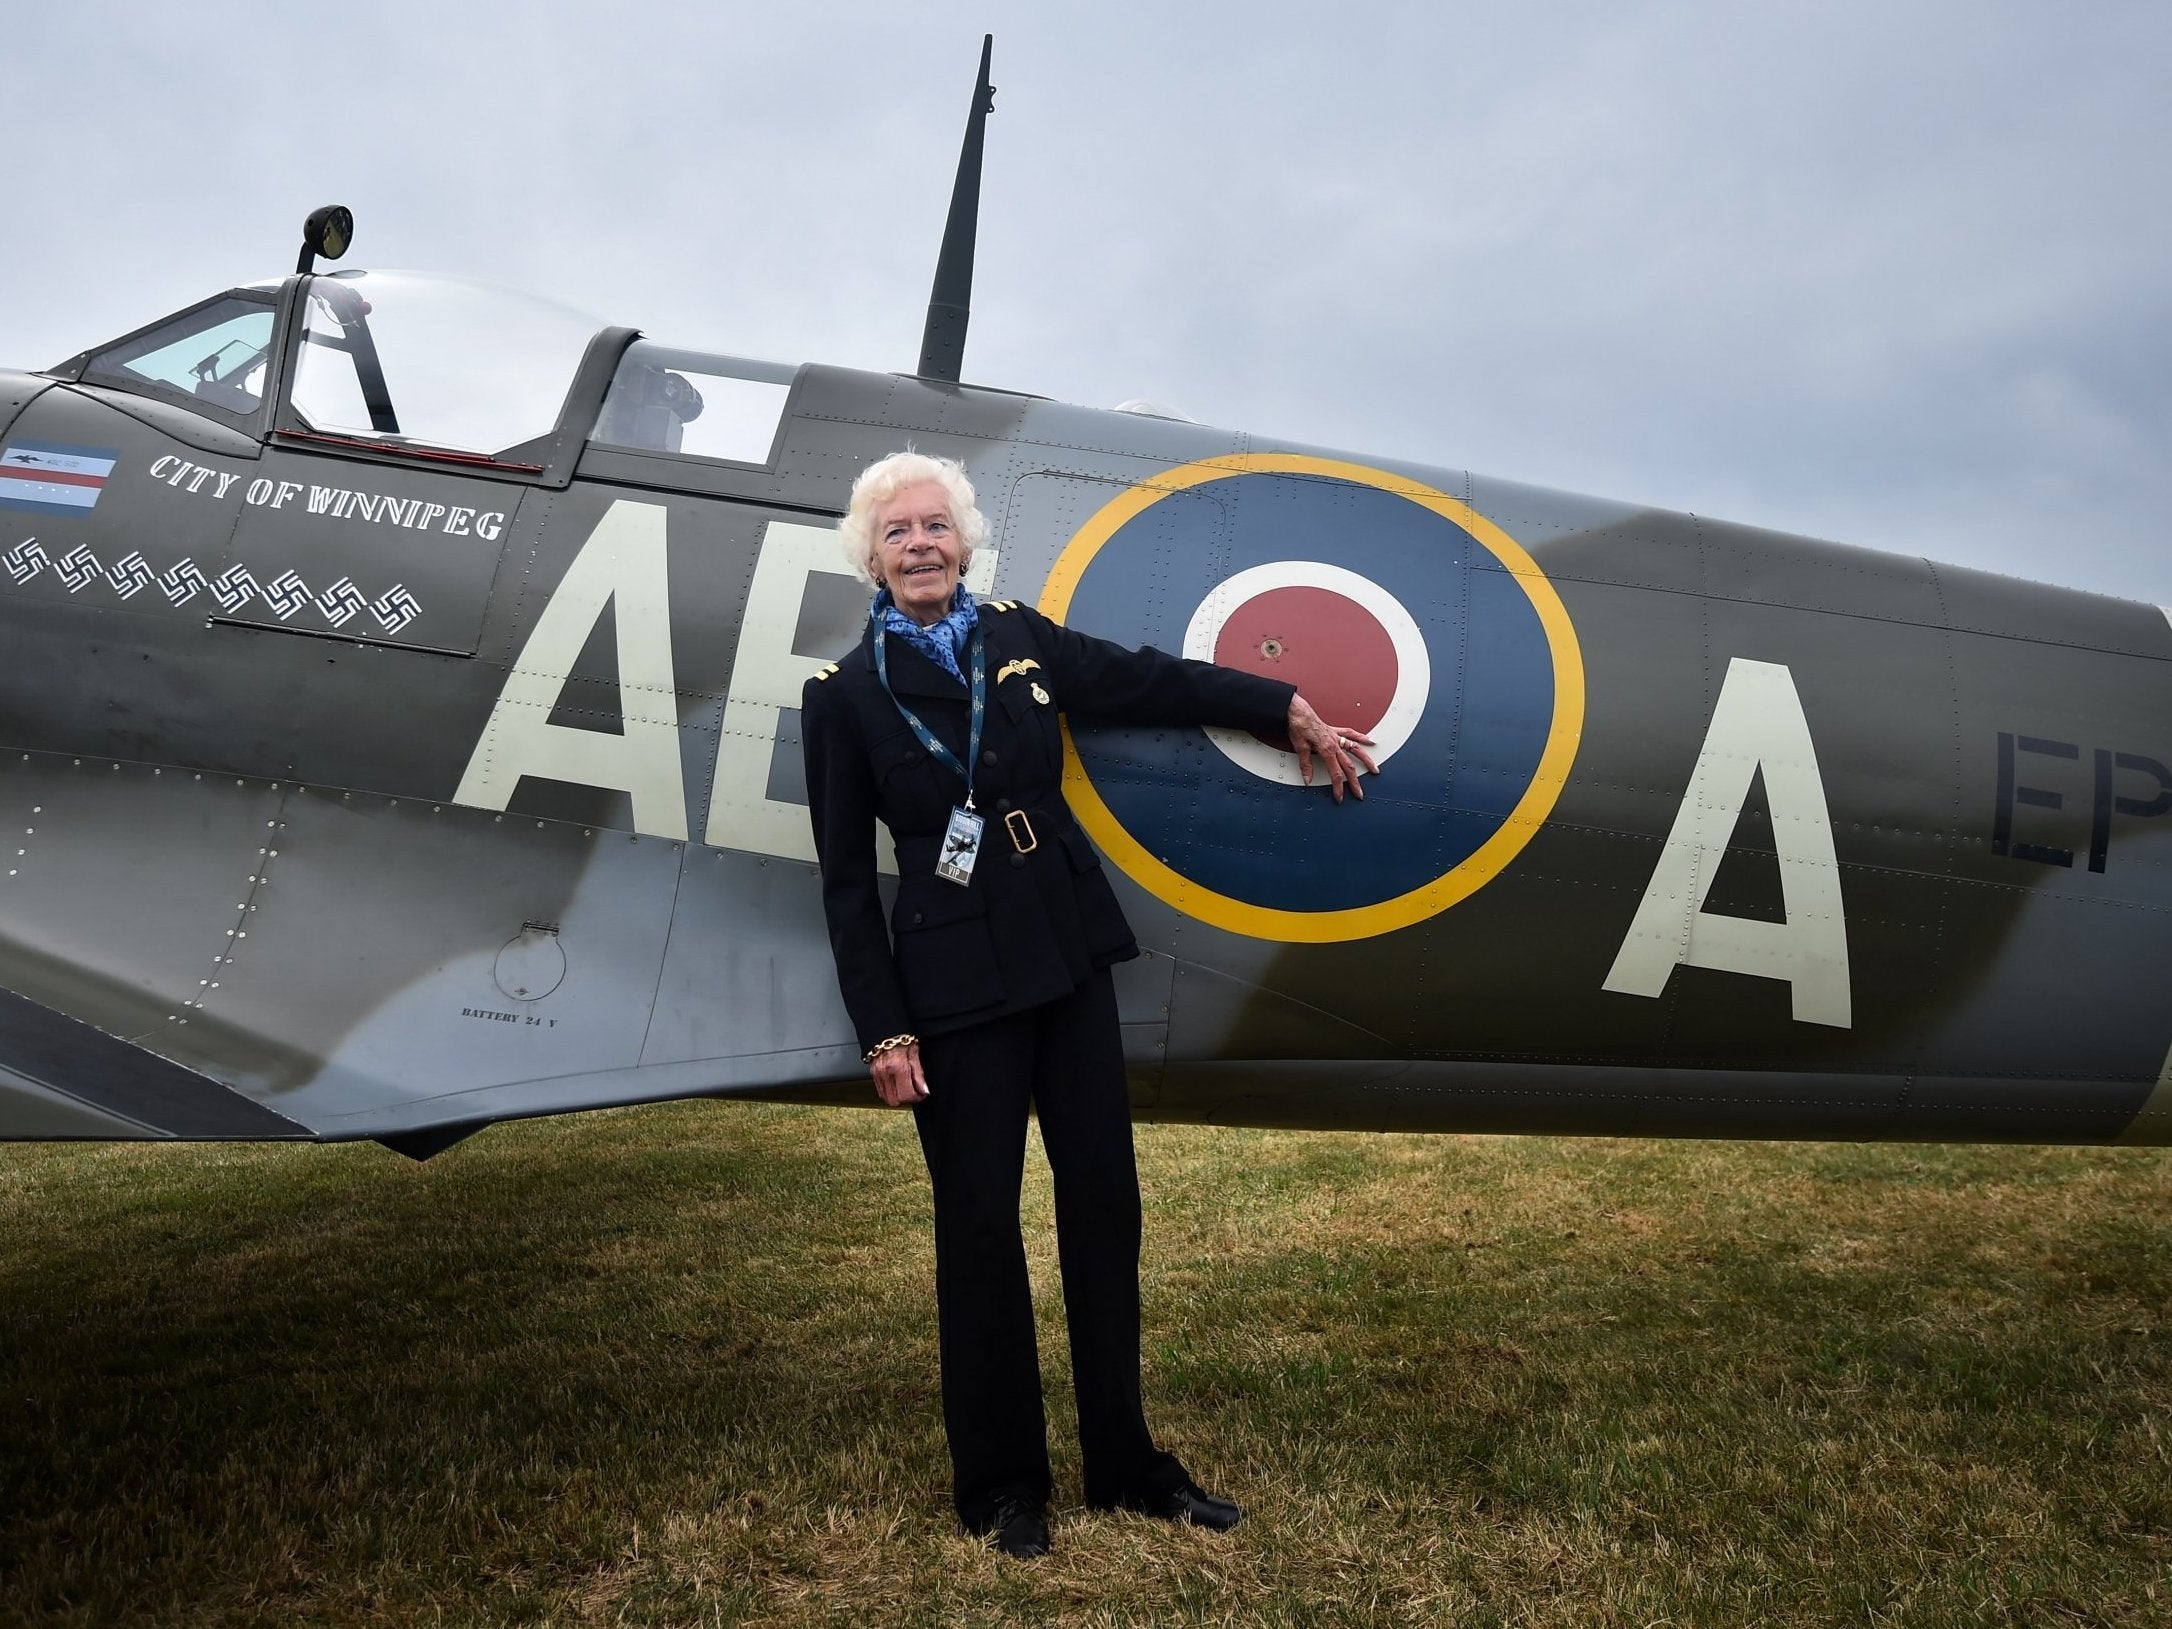 'Occasionally I would take a spitfire up and go and play with the clouds'